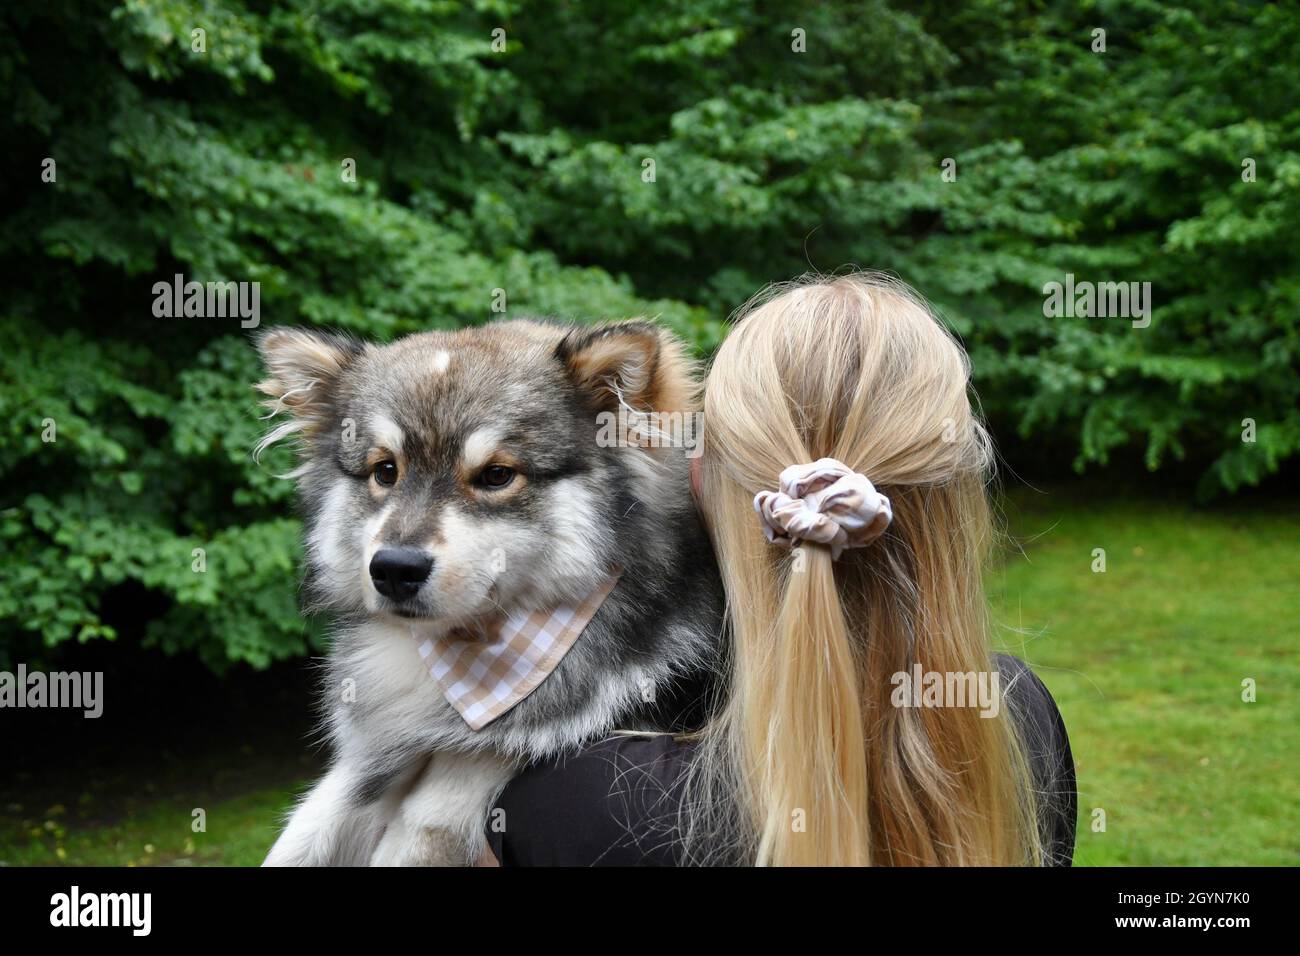 Portrait of a young Finnish Lapphund dog and a millennial woman wearing matching bandana and scrunchie Stock Photo